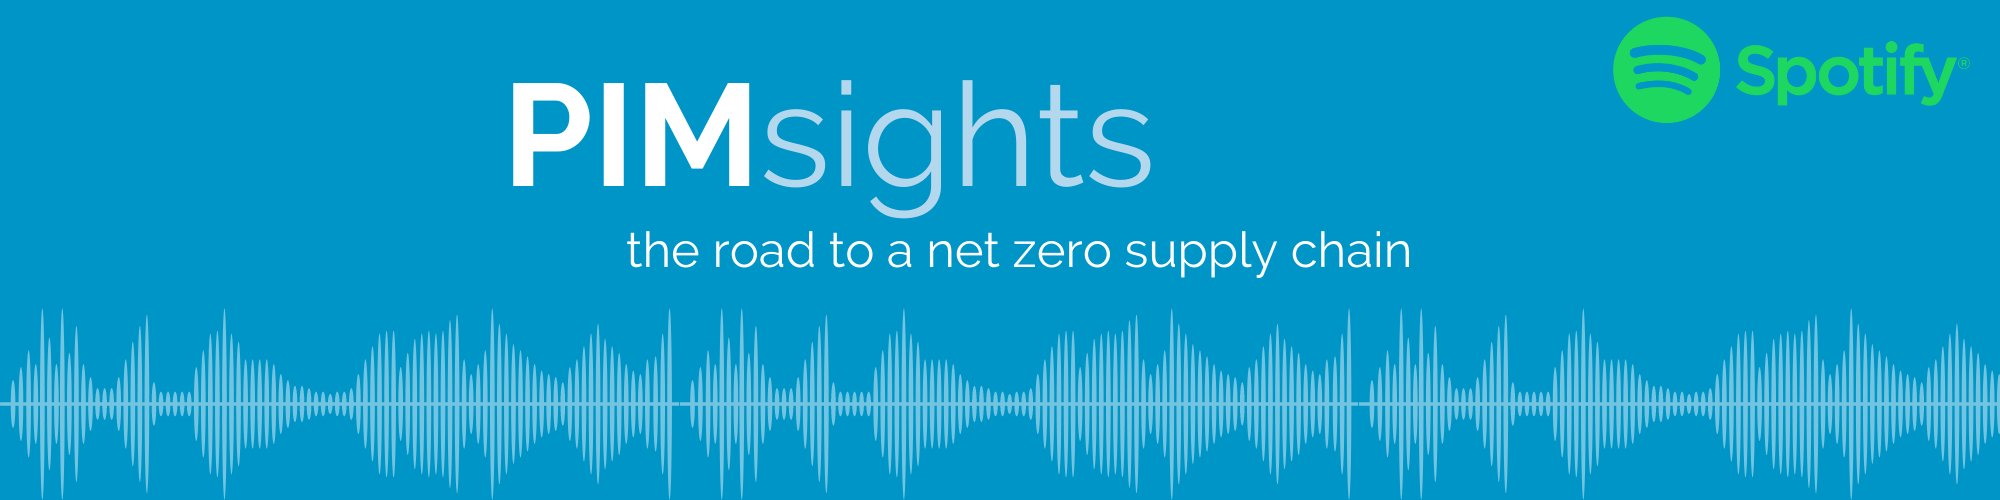 the road to a net zero supply chain